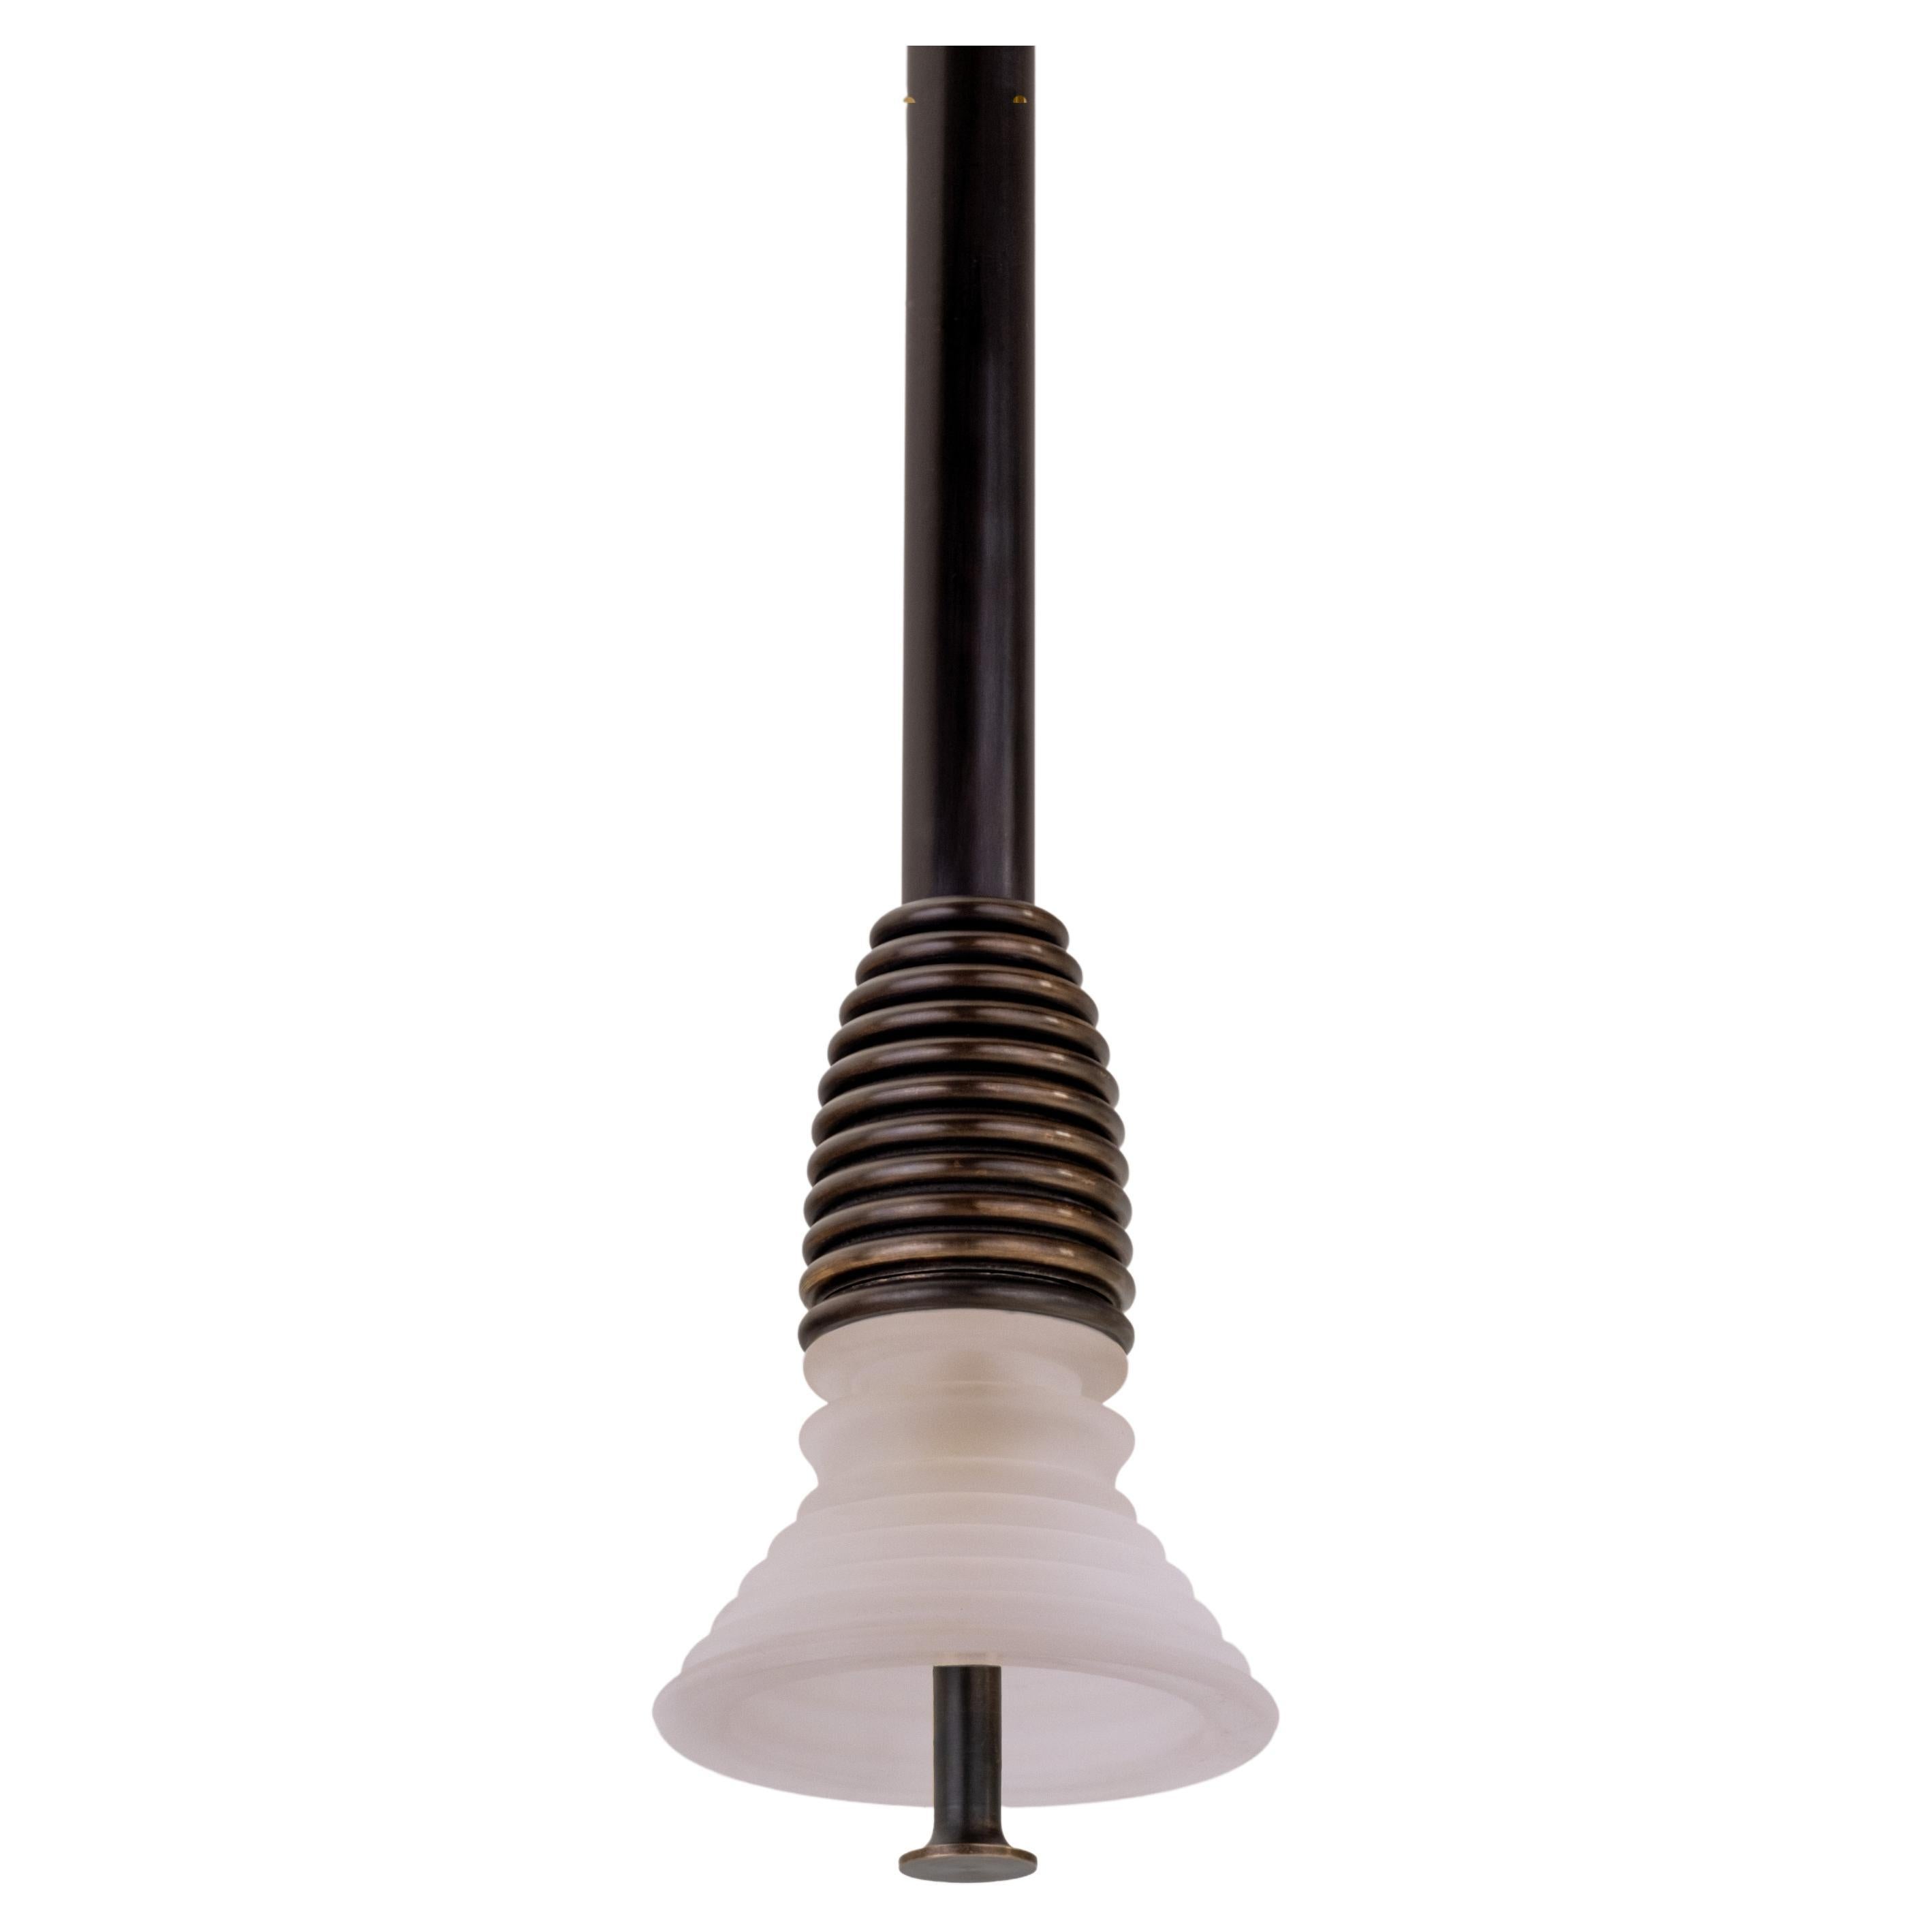 The Insulator 'A' Pendant in dark brass and frosted glass by NOVOCASTRIAN deco